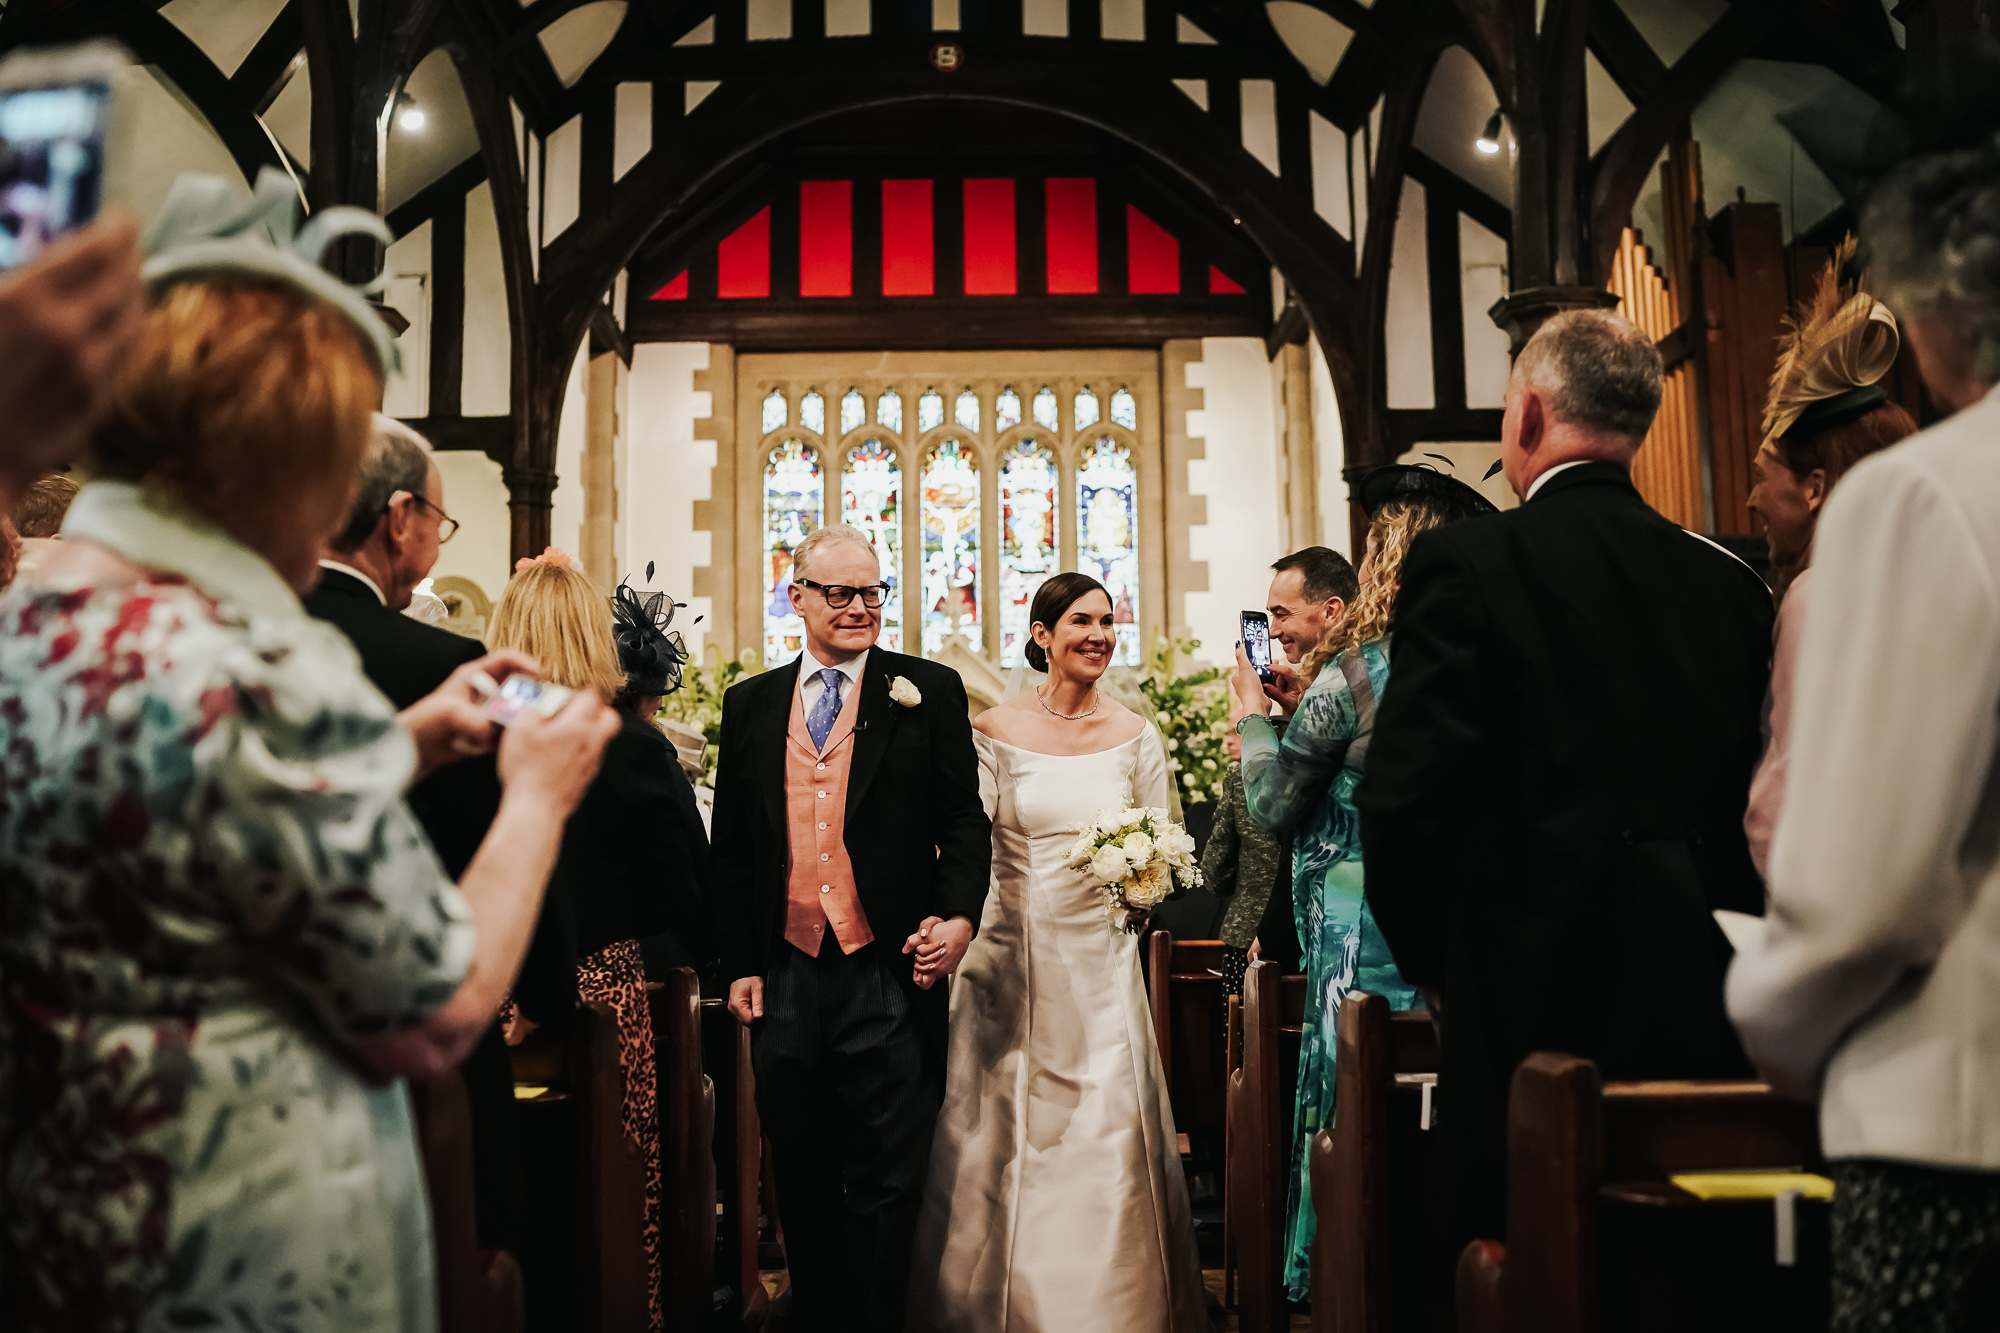 Cheshire wedding at home wedding photography (24 of 49).jpg